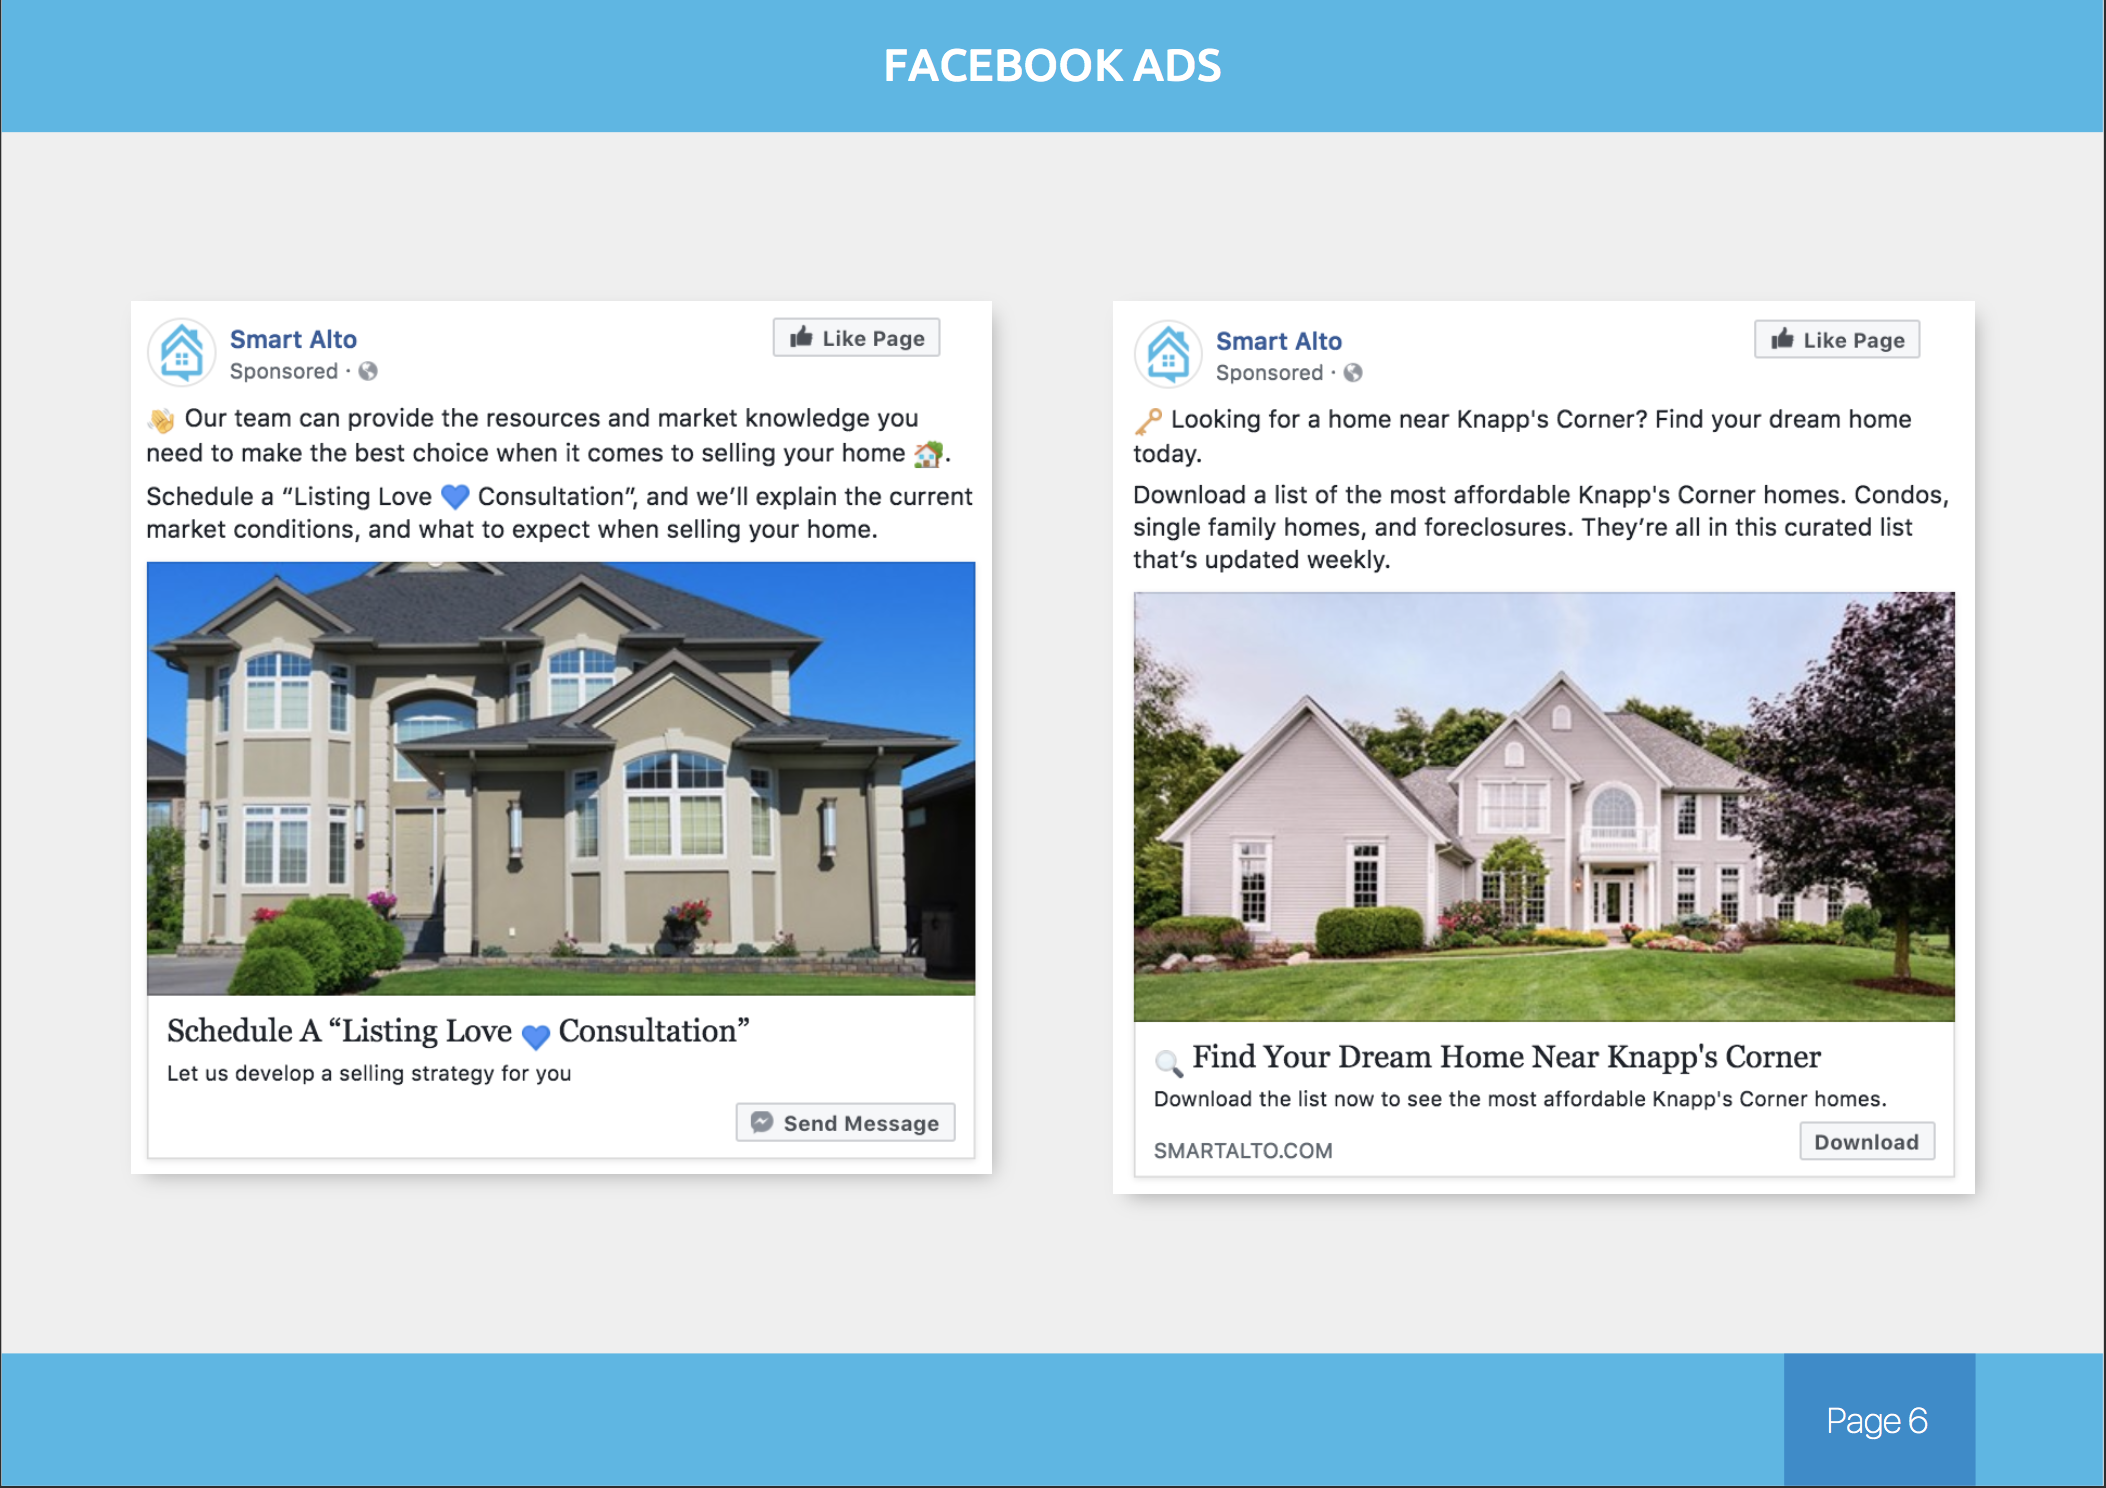 How to create facebook ads to get real estate agents as ad management clients